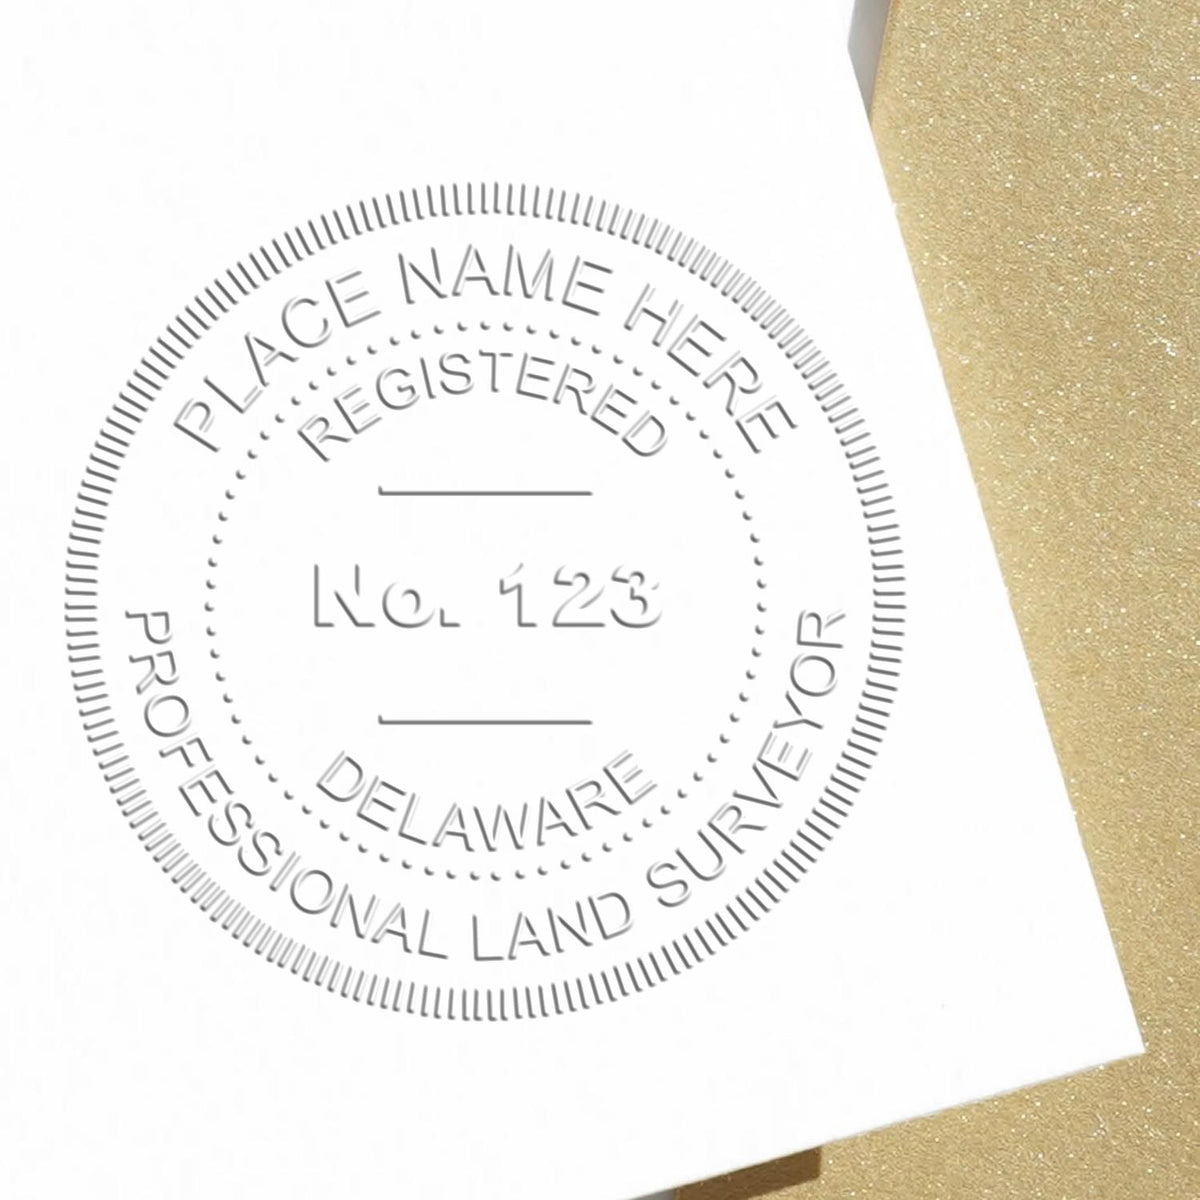 The Long Reach Delaware Land Surveyor Seal stamp impression comes to life with a crisp, detailed photo on paper - showcasing true professional quality.